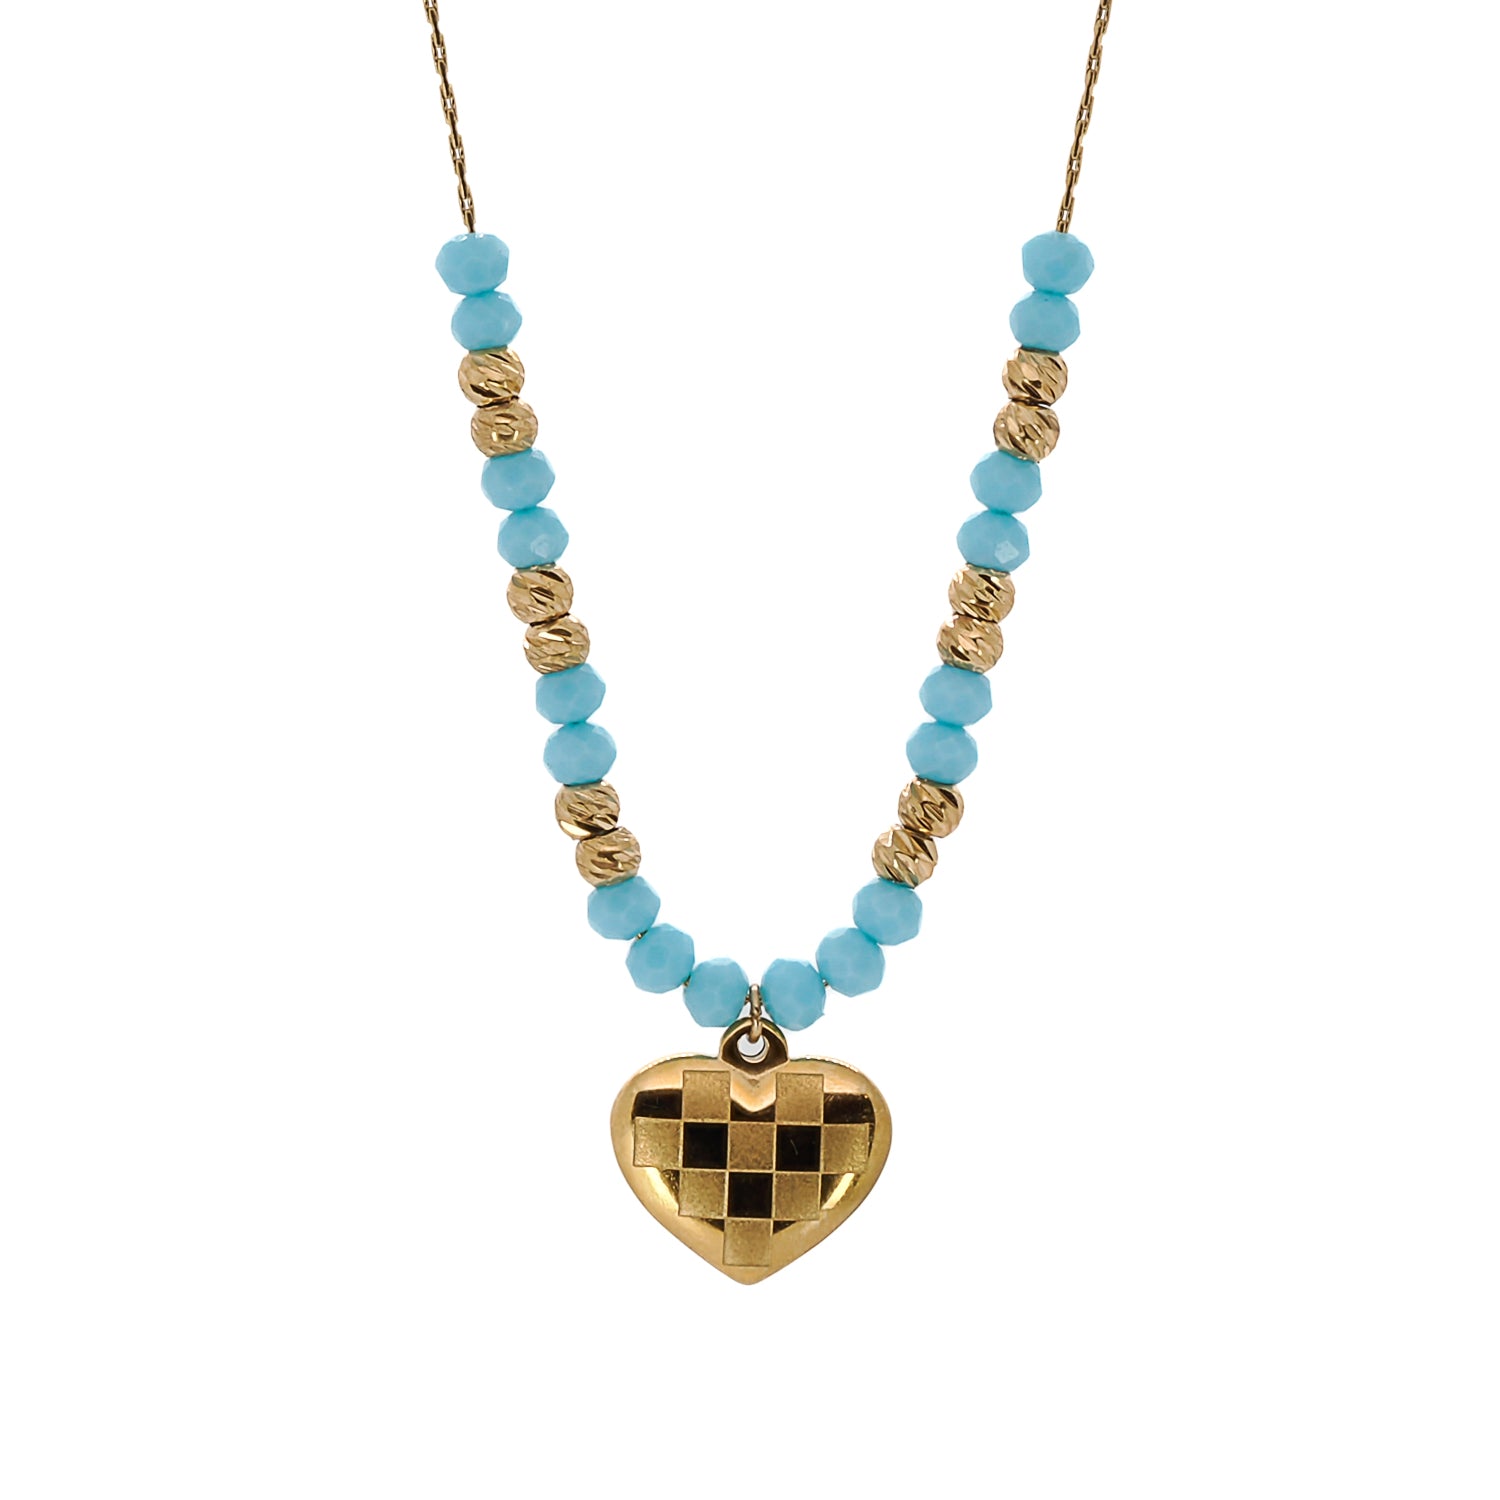 Blue Love Gold Heart Necklace - Elegance and Affection.